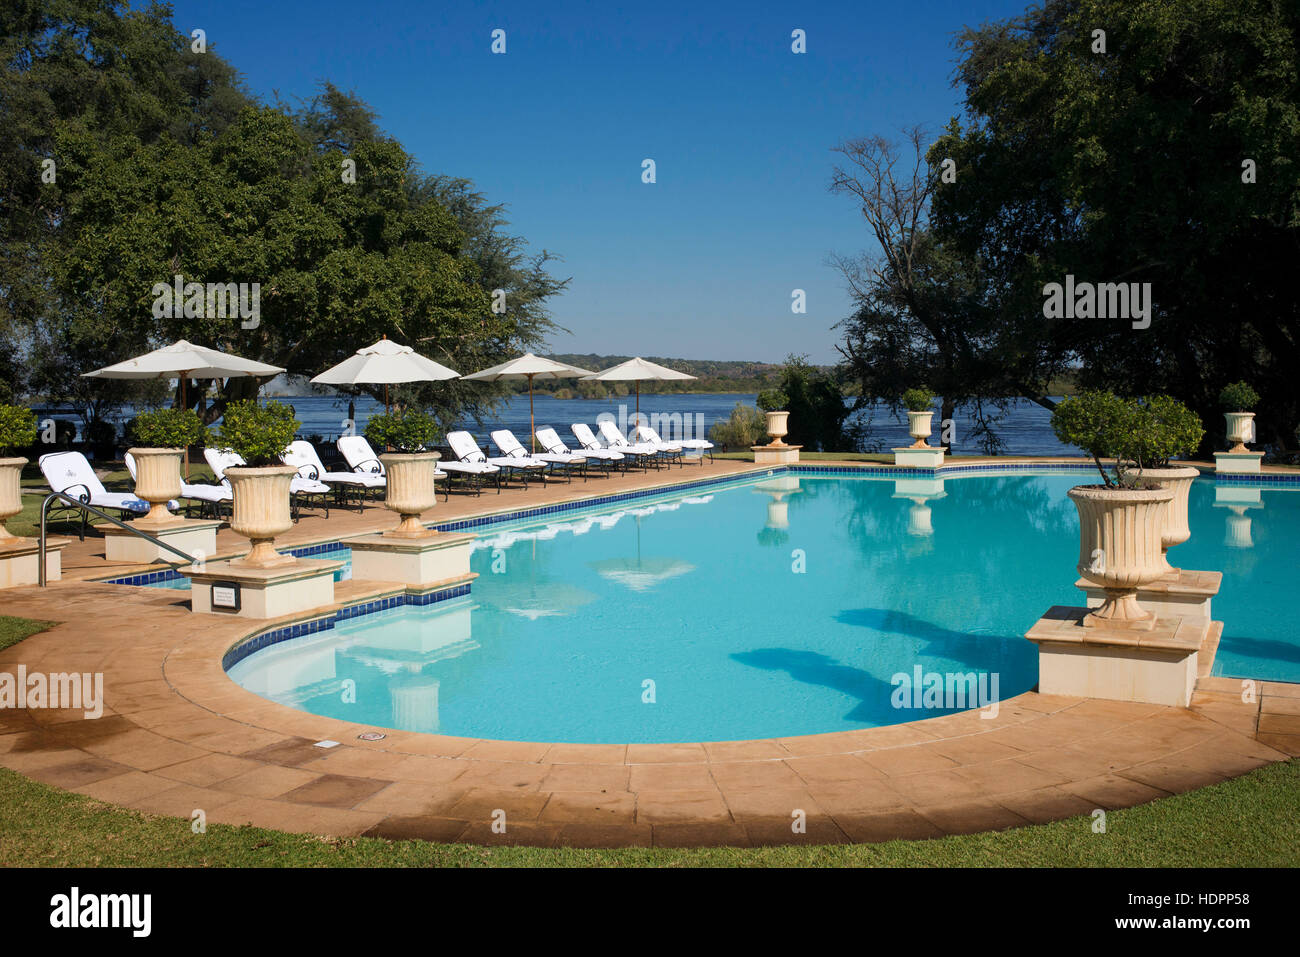 Royal Livingstone Hotel swimming pool. At The Royal Livingstone Hotel, you can expect nothing less than the best service. The aim is to exceed your ex Stock Photo